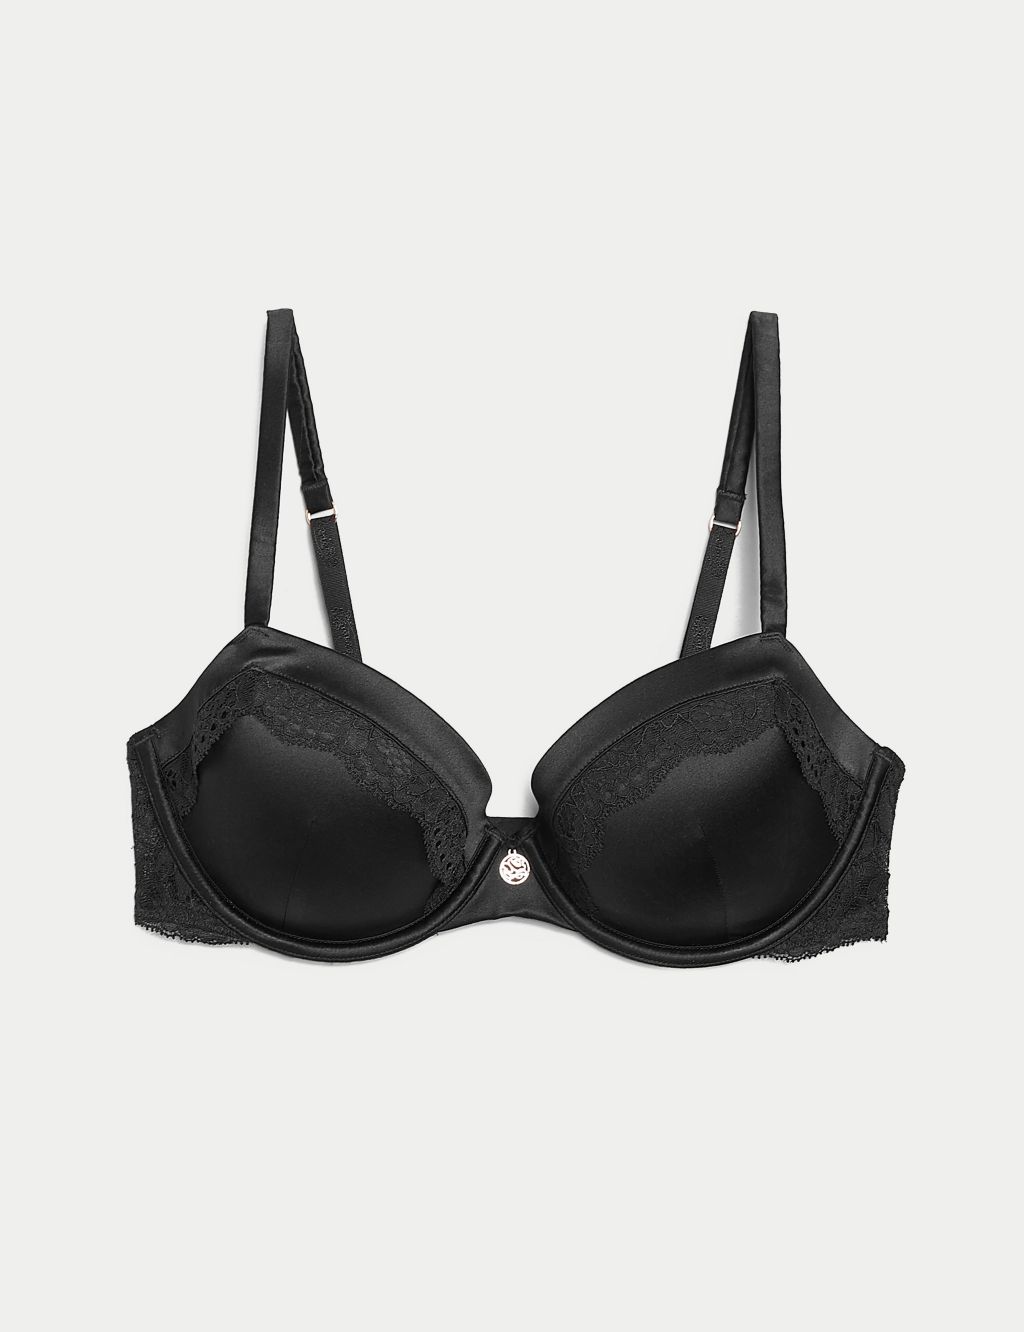 M&S BOUTIQUE EMBROIDERED UNDERWIRED, PUSH UP BALCONY BRA In BLACK